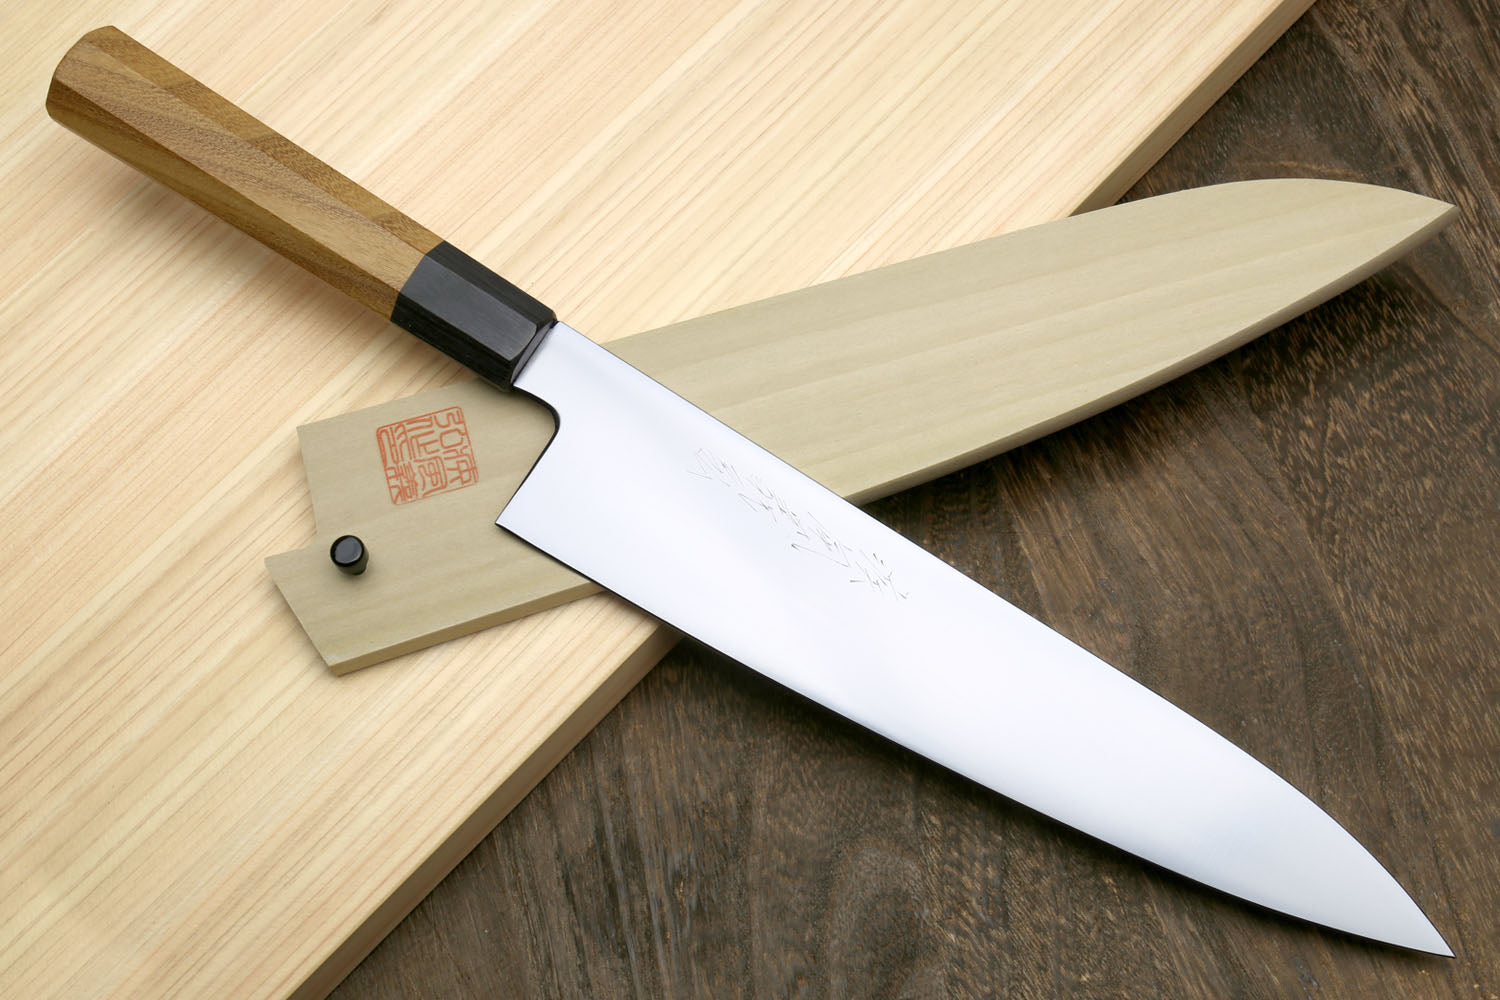 SEIDO Japanese Master Chef Knife Dices and Slices Like a Boss